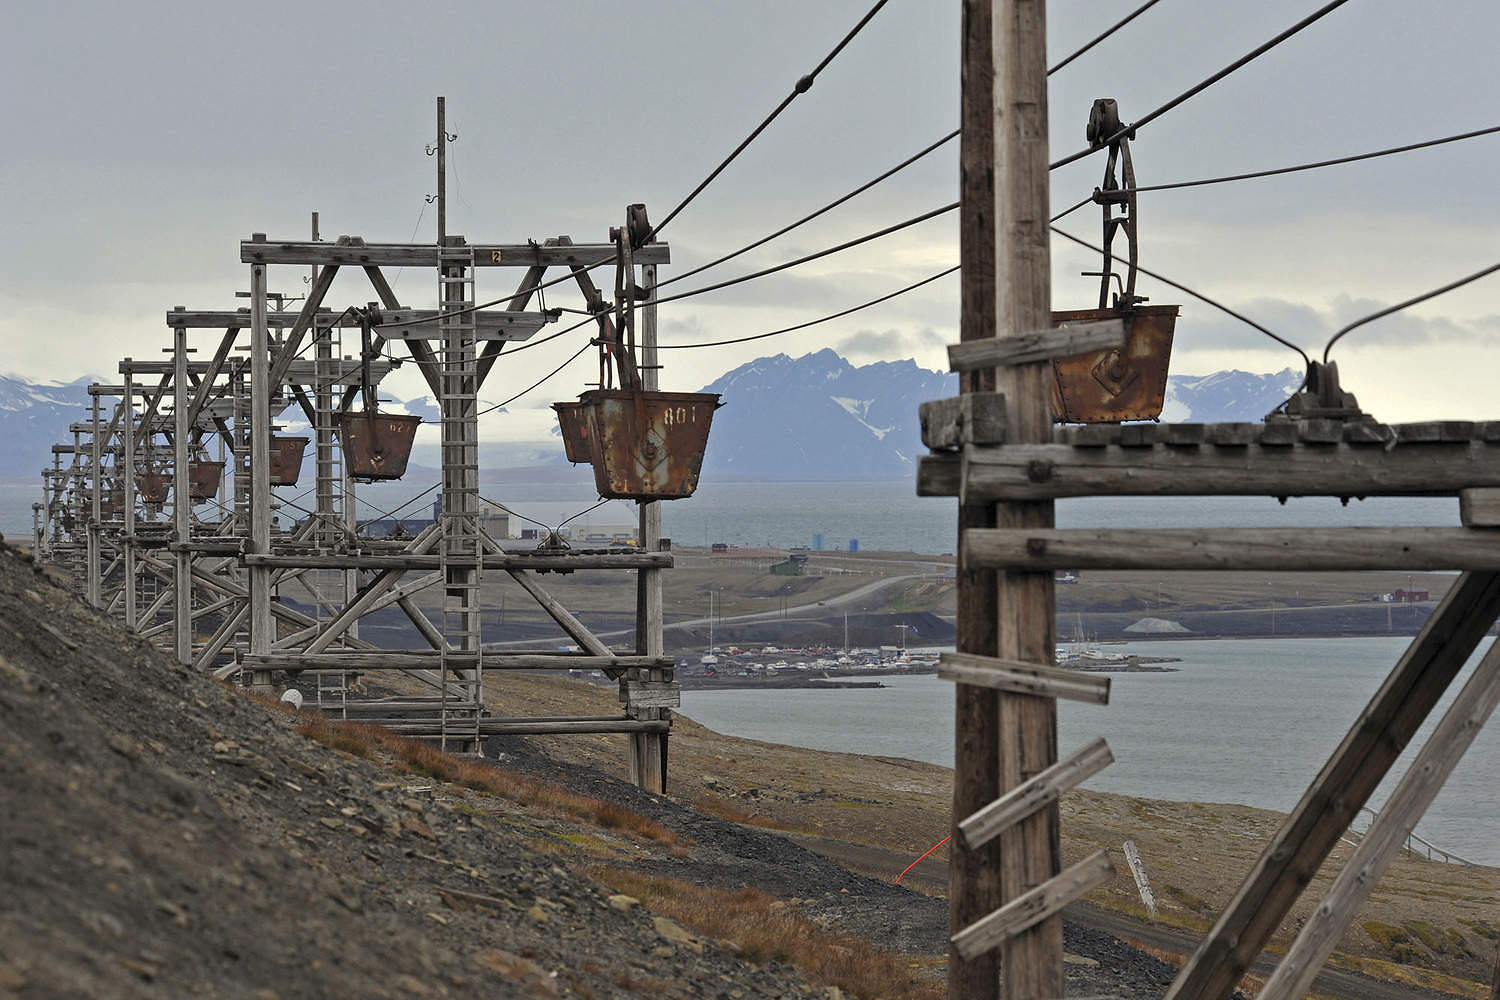 Historical wooden mining cableway for transporting coal, 21 August 2012